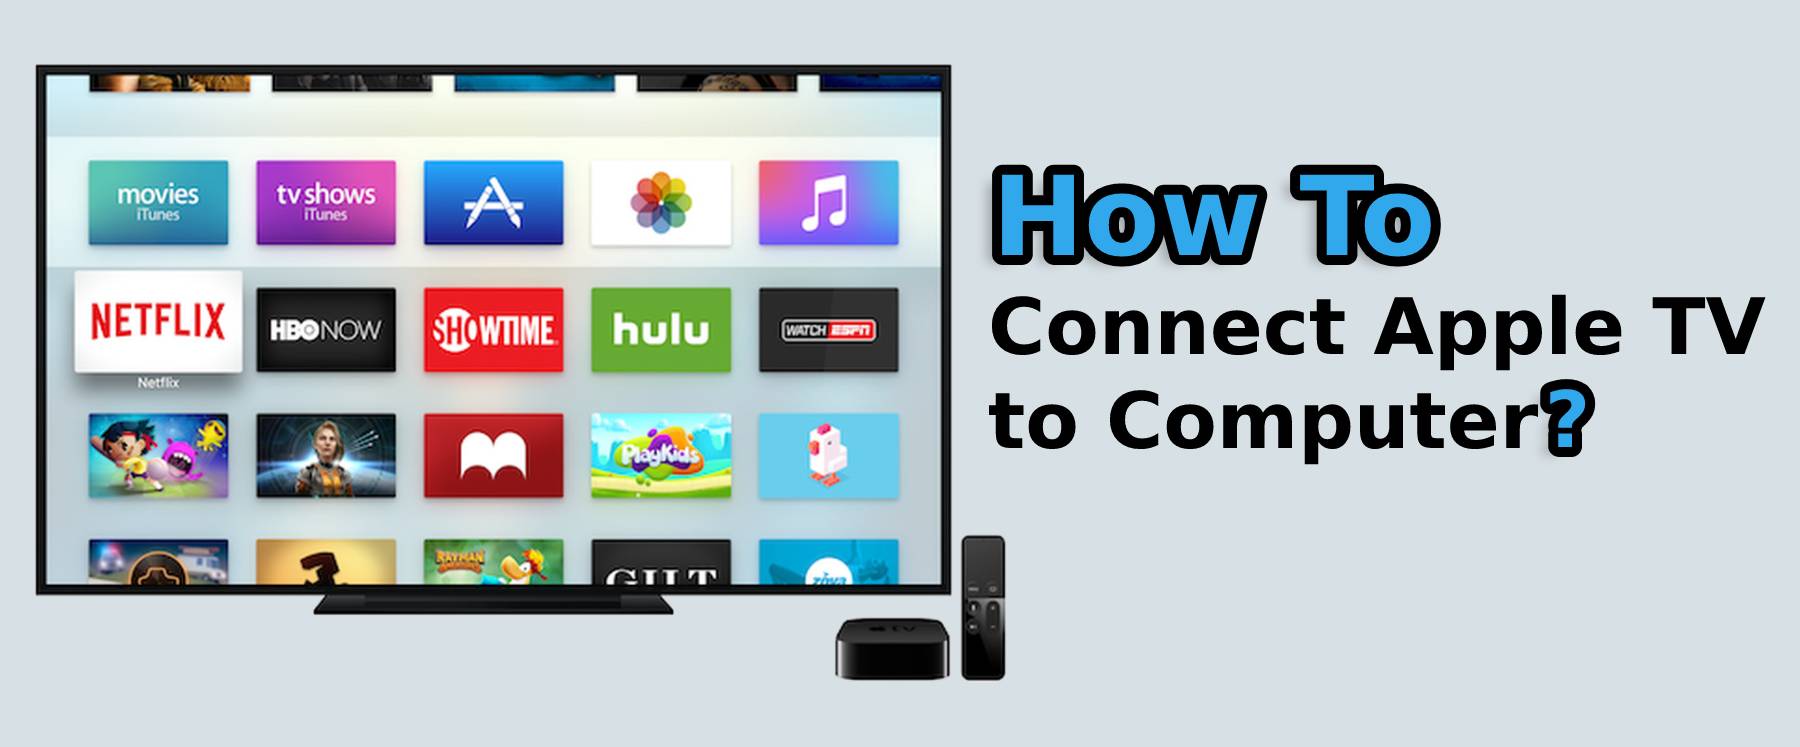 How to Connect Apple TV to Computer and Vice Versa?